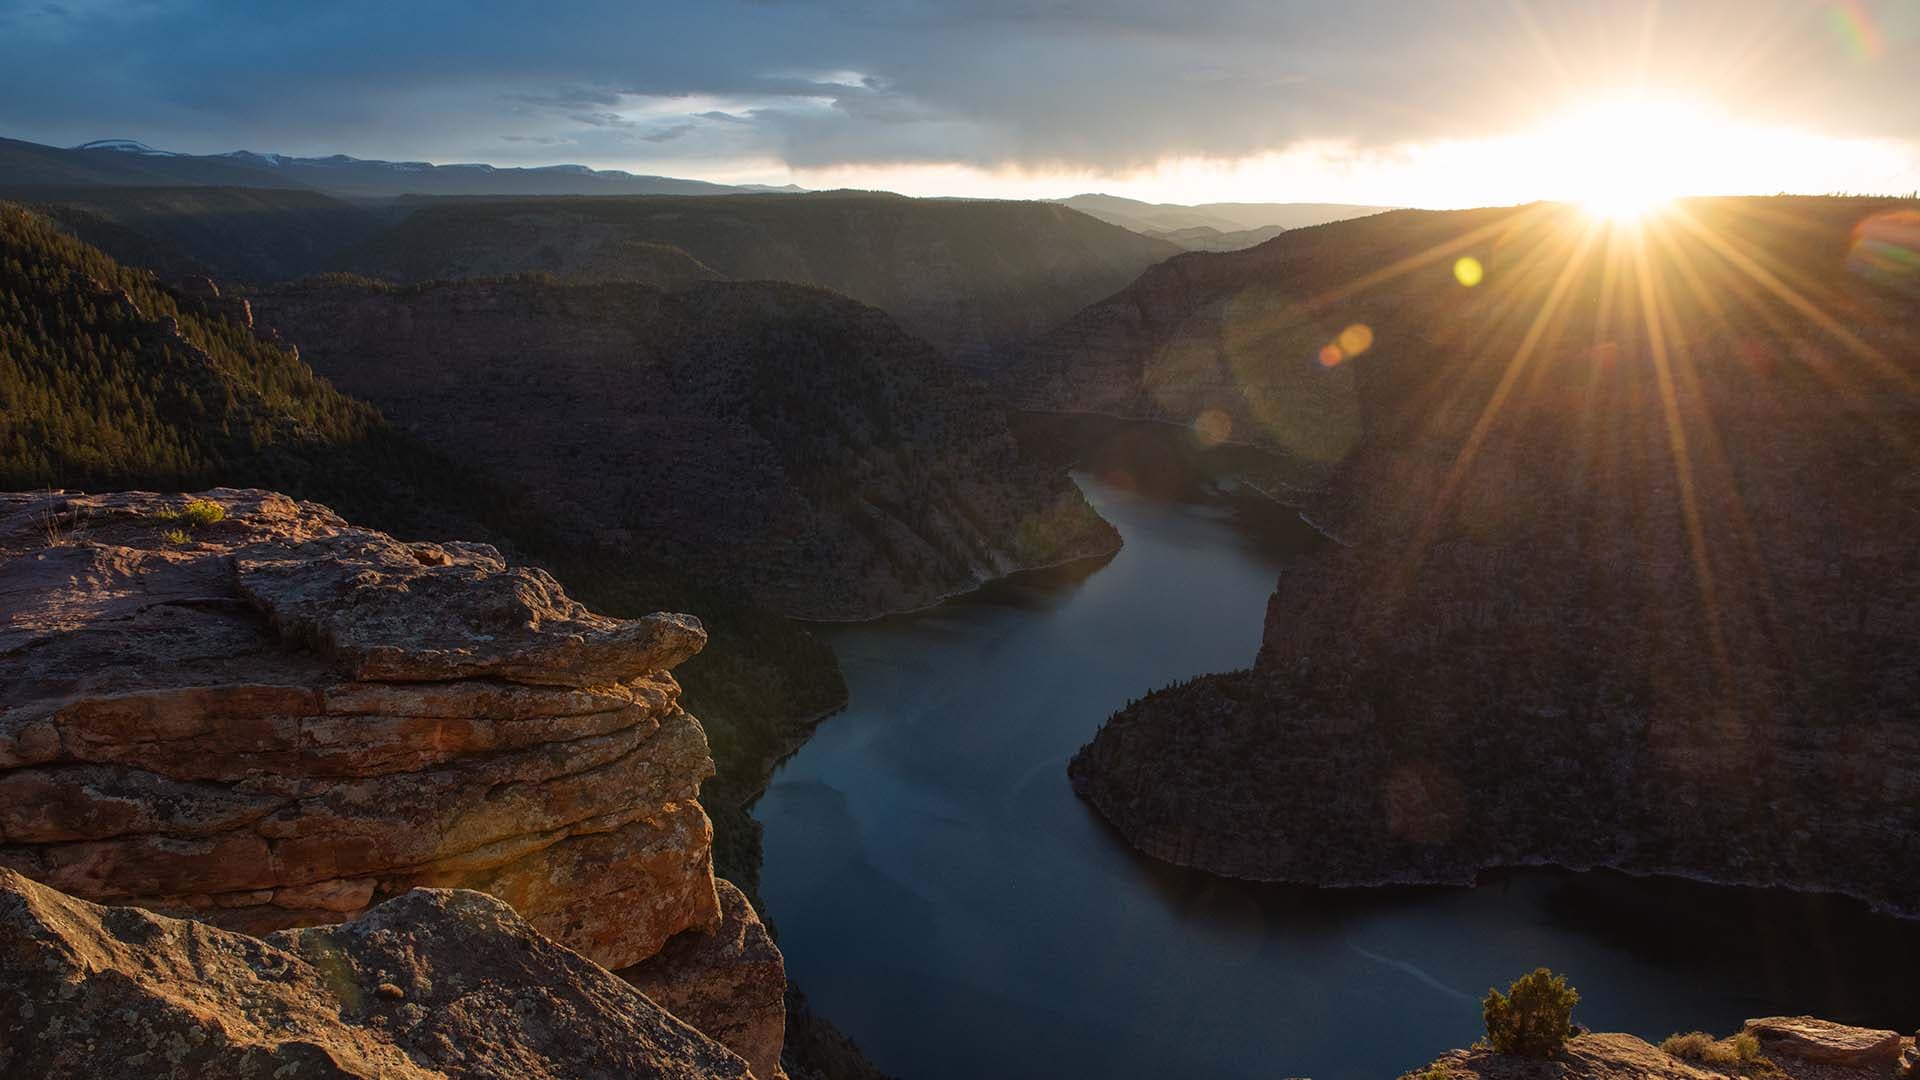 Road Trip to Wyoming's Flaming Gorge